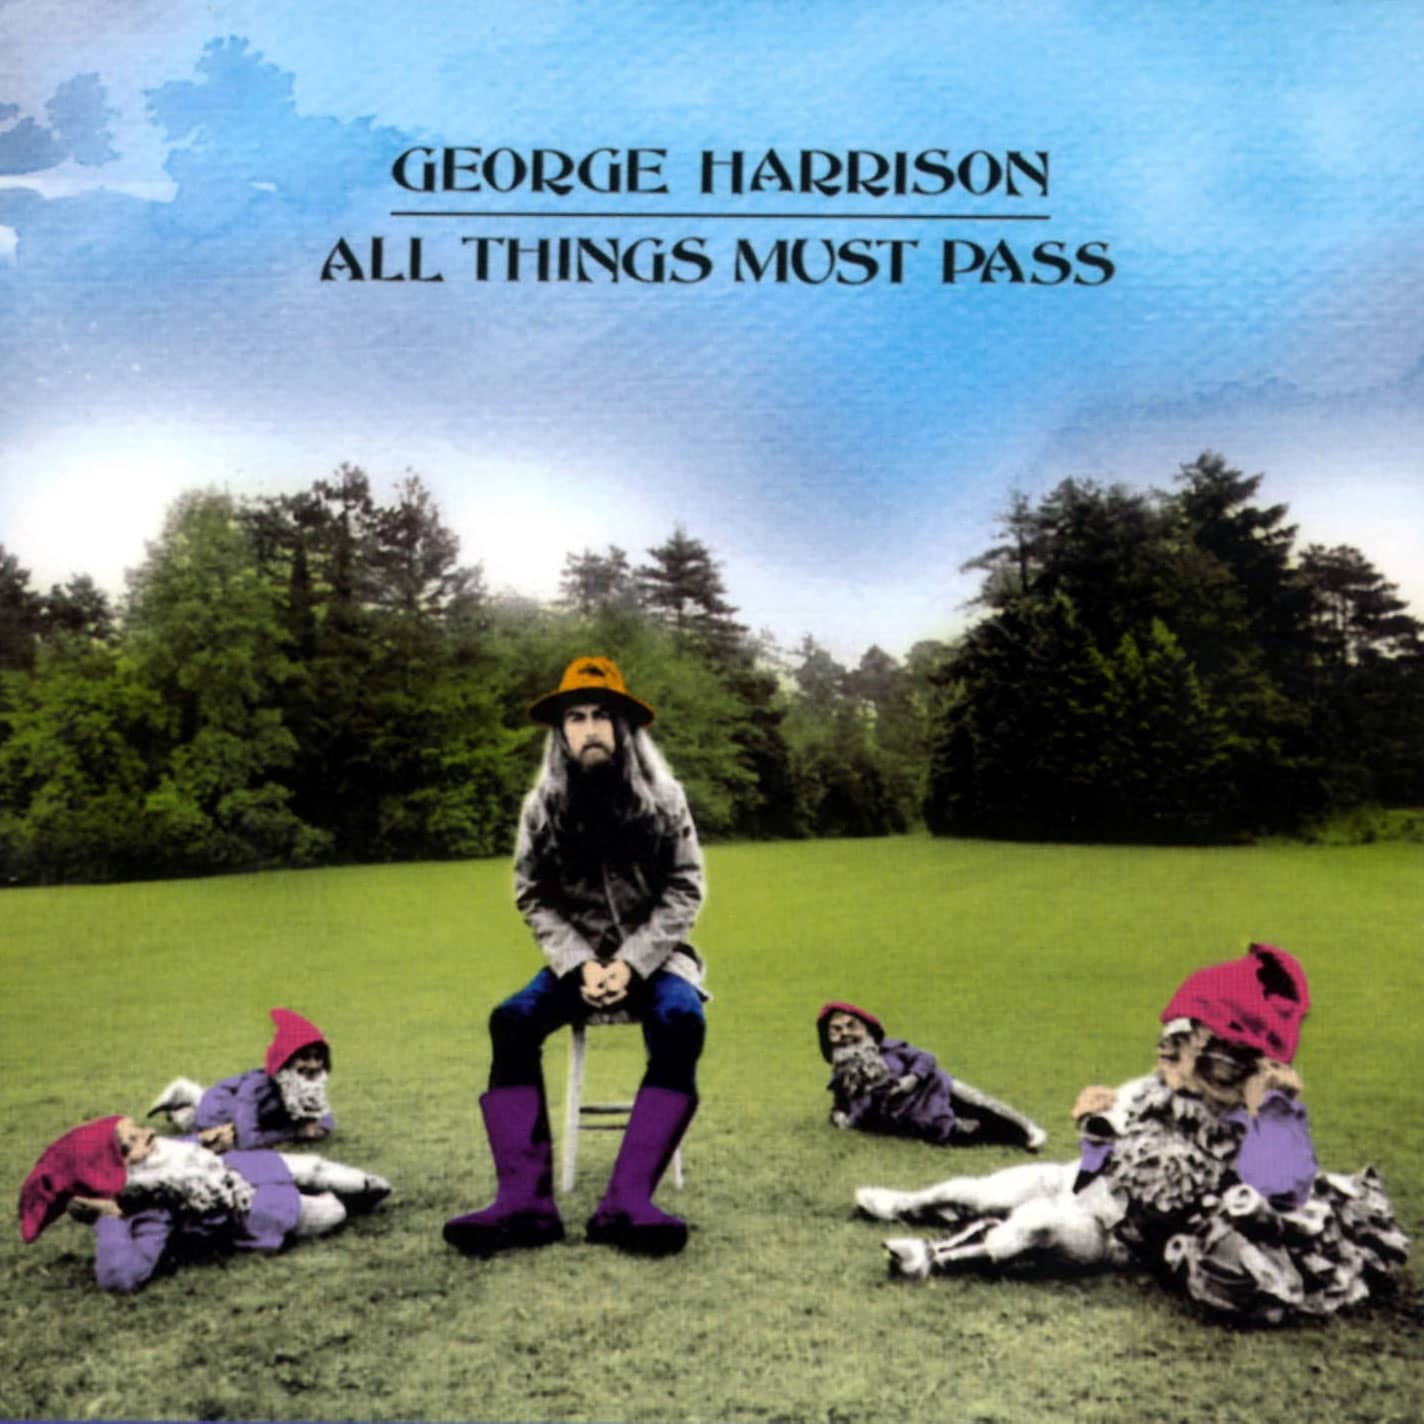 George Harrison All Things Must Pass Album